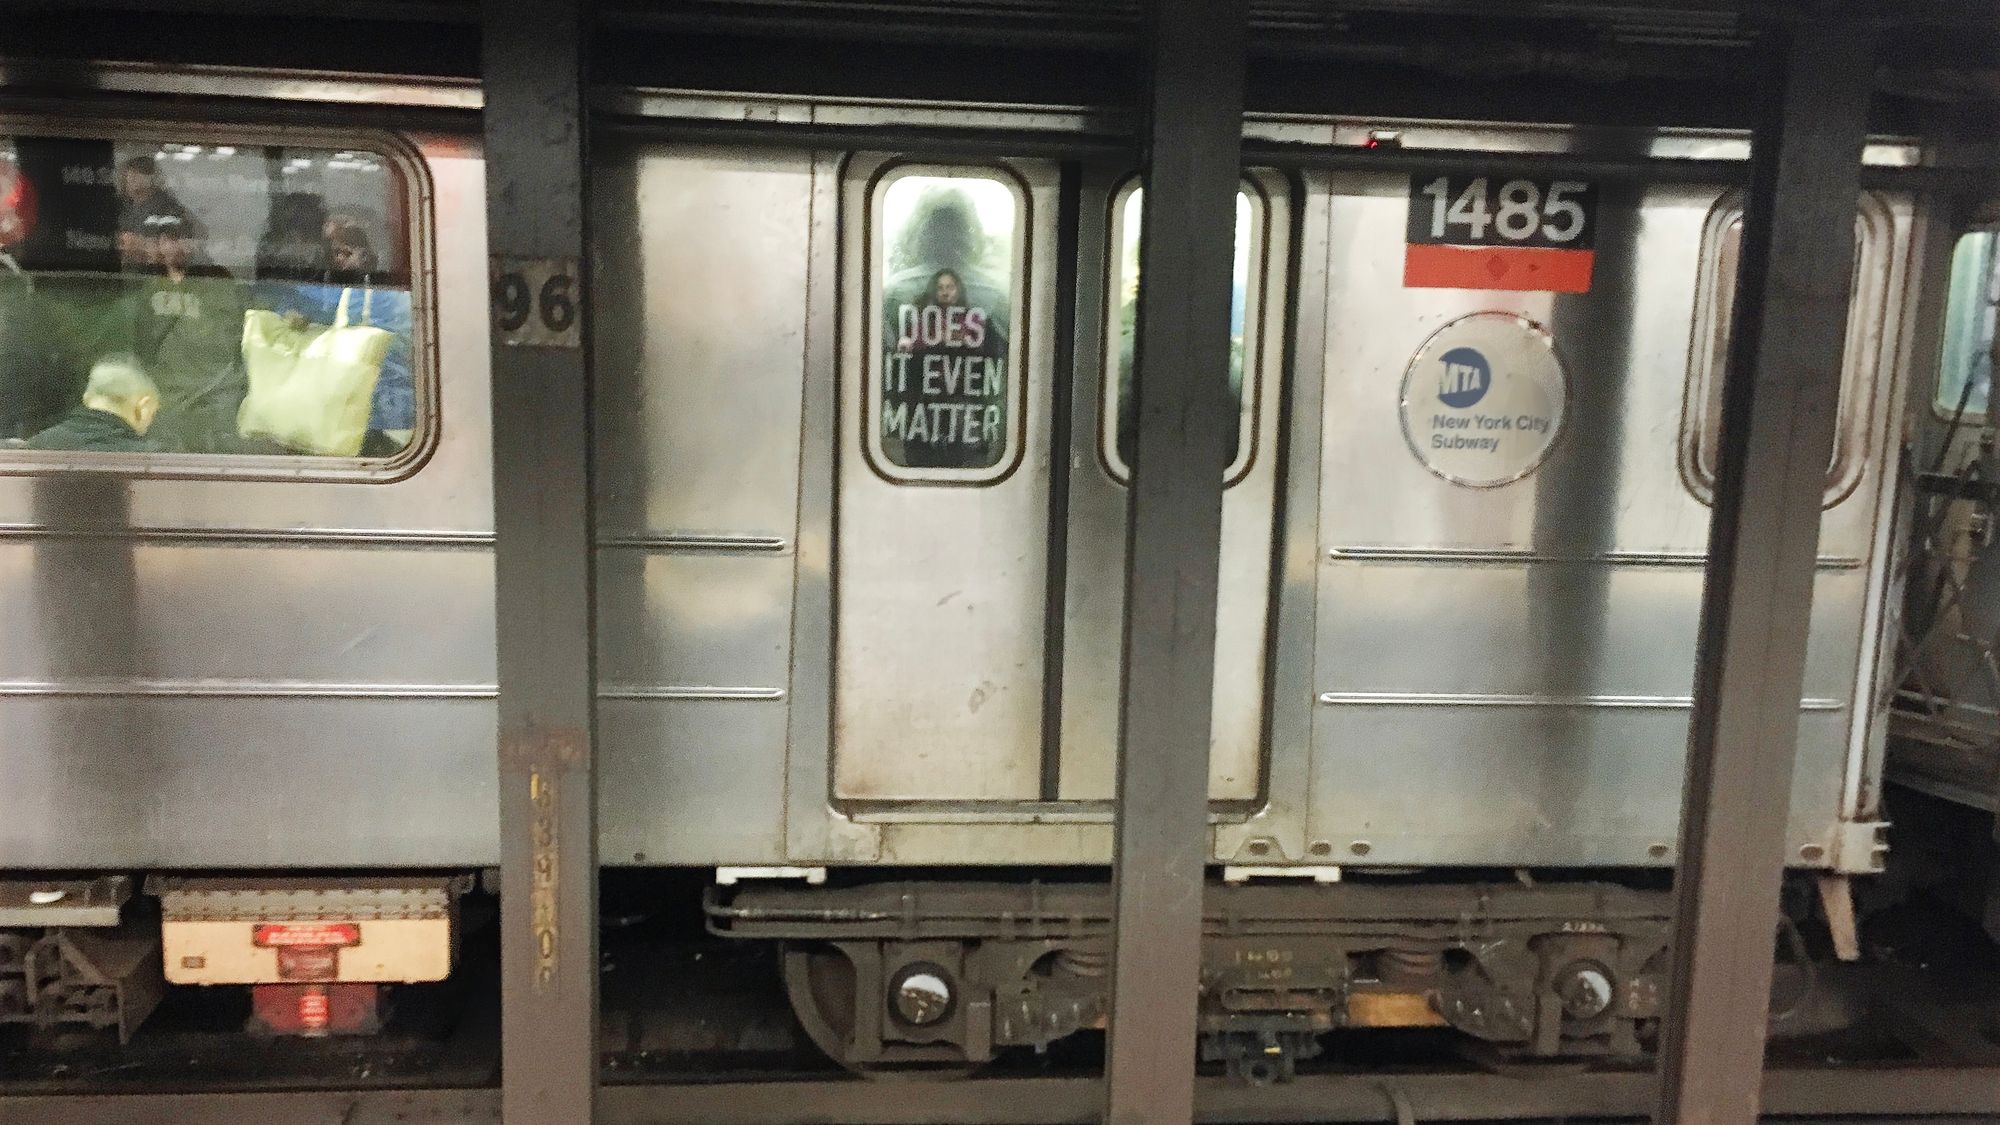 The text on the back of a MTA's passengers jacket reads "DOES IT EVEN MATTER", visible through a train door.